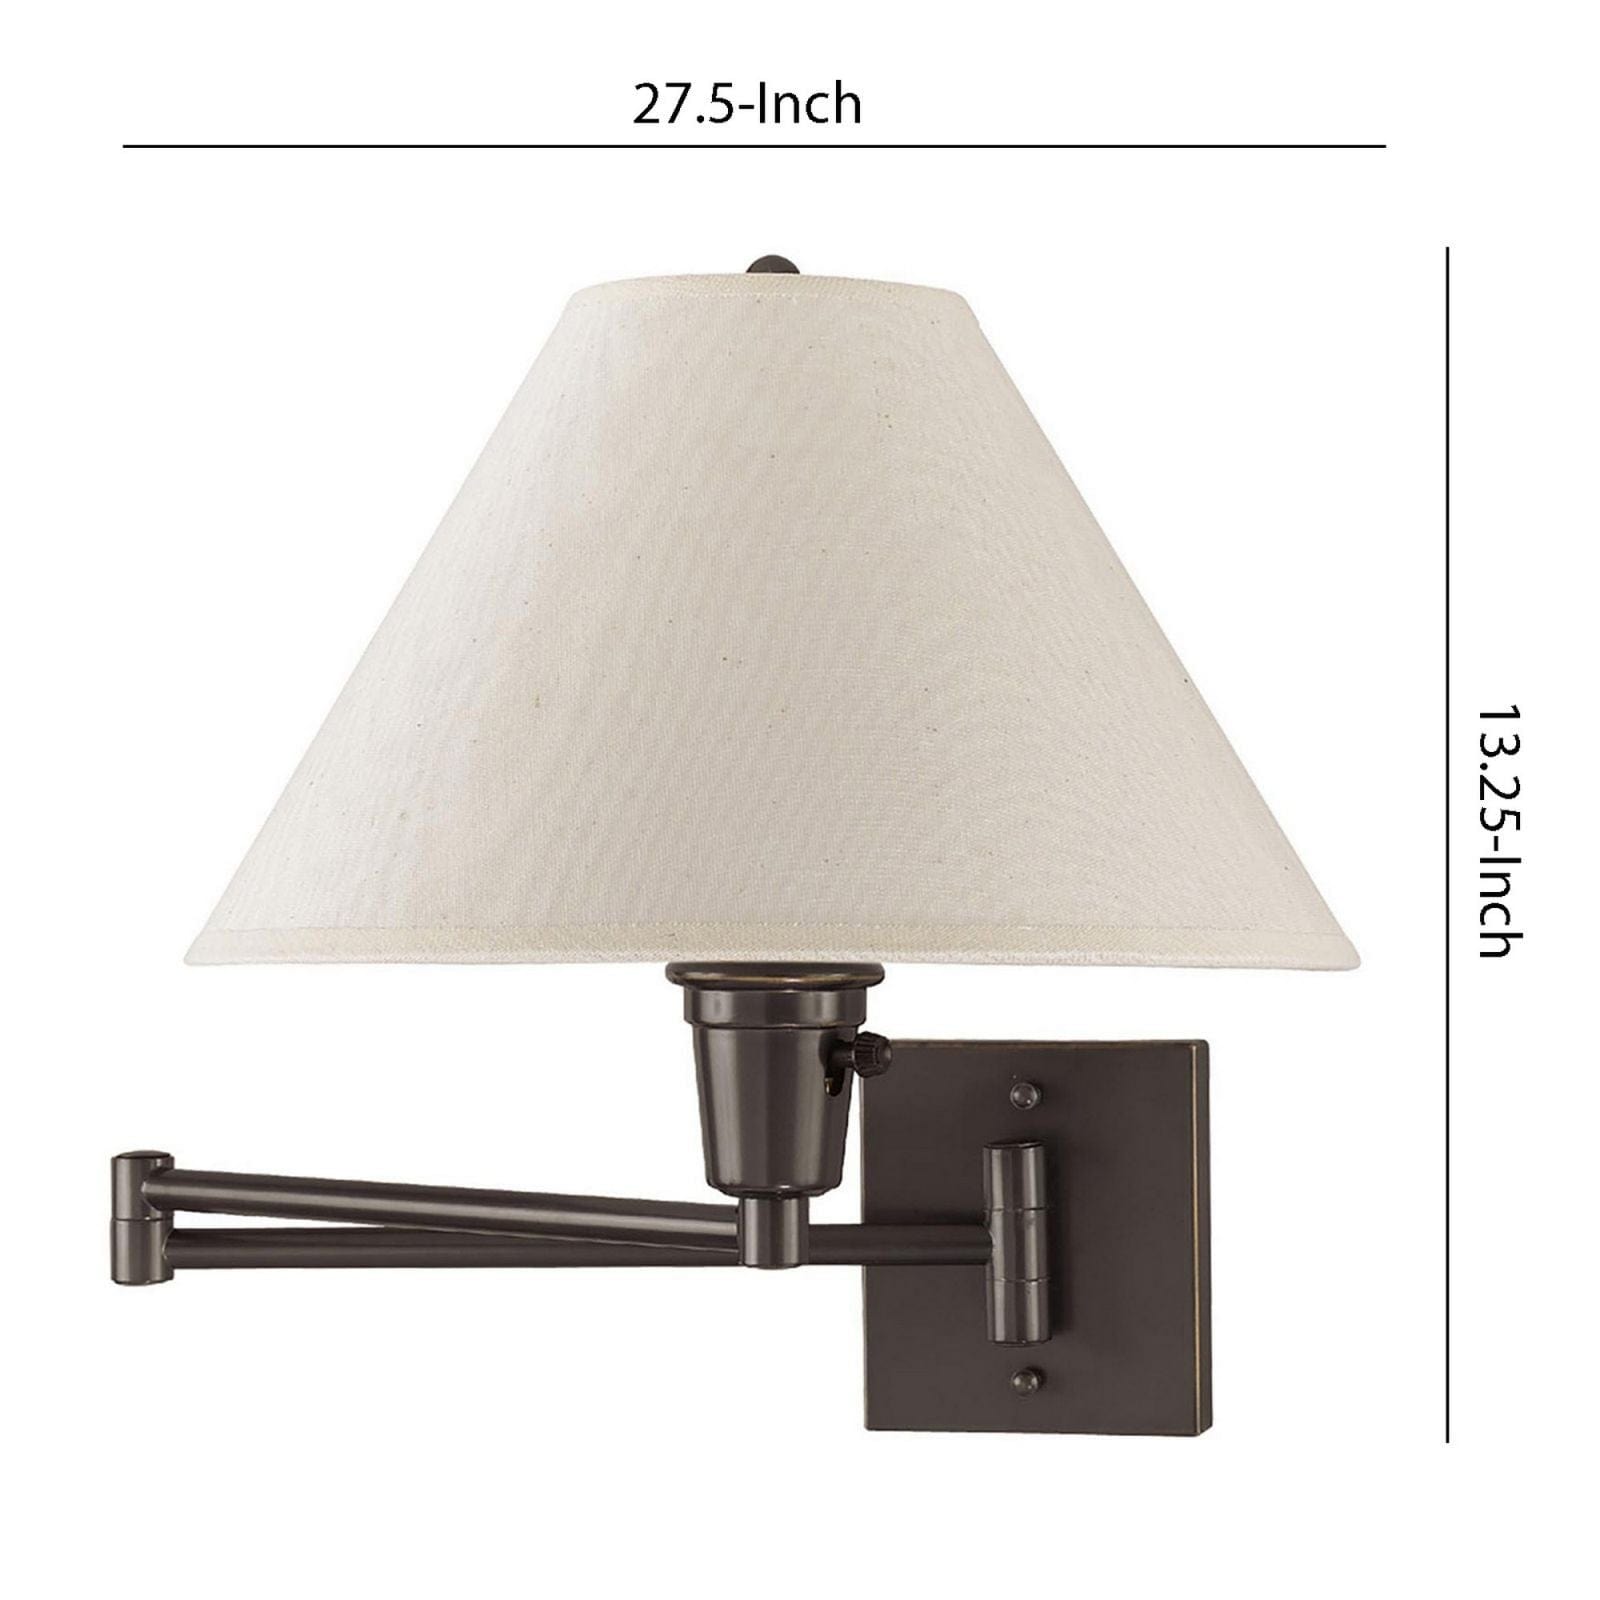 Benzara 60 Watt Metal Swing Arm Wall Lamp With Tapered Shade, Off White And Bronze By Benzara Wall Lamps BM220648